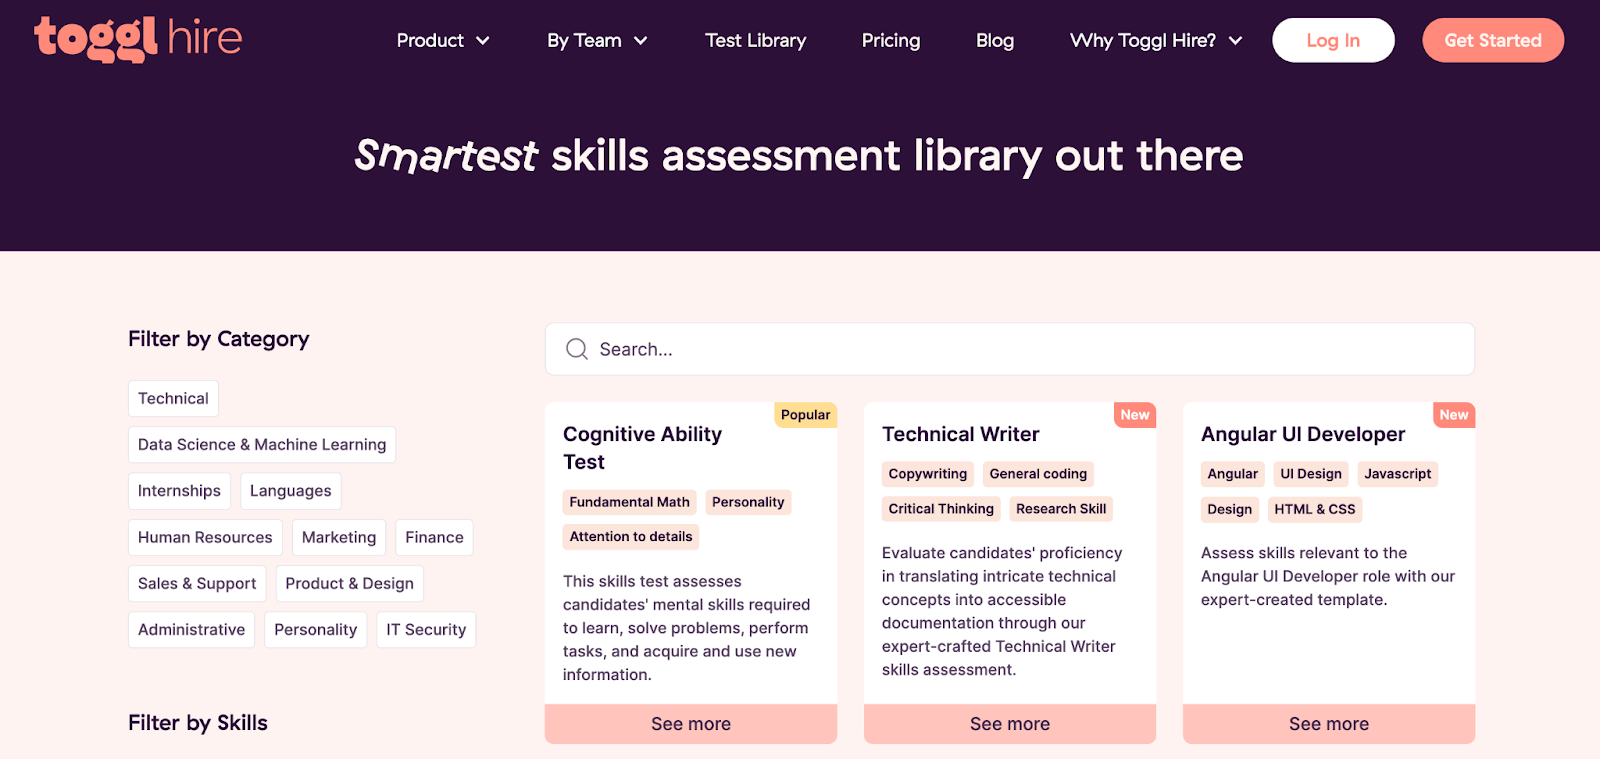 Toggl Hire's test library contains hundreds of assessments for different types of roles and skill sets. 